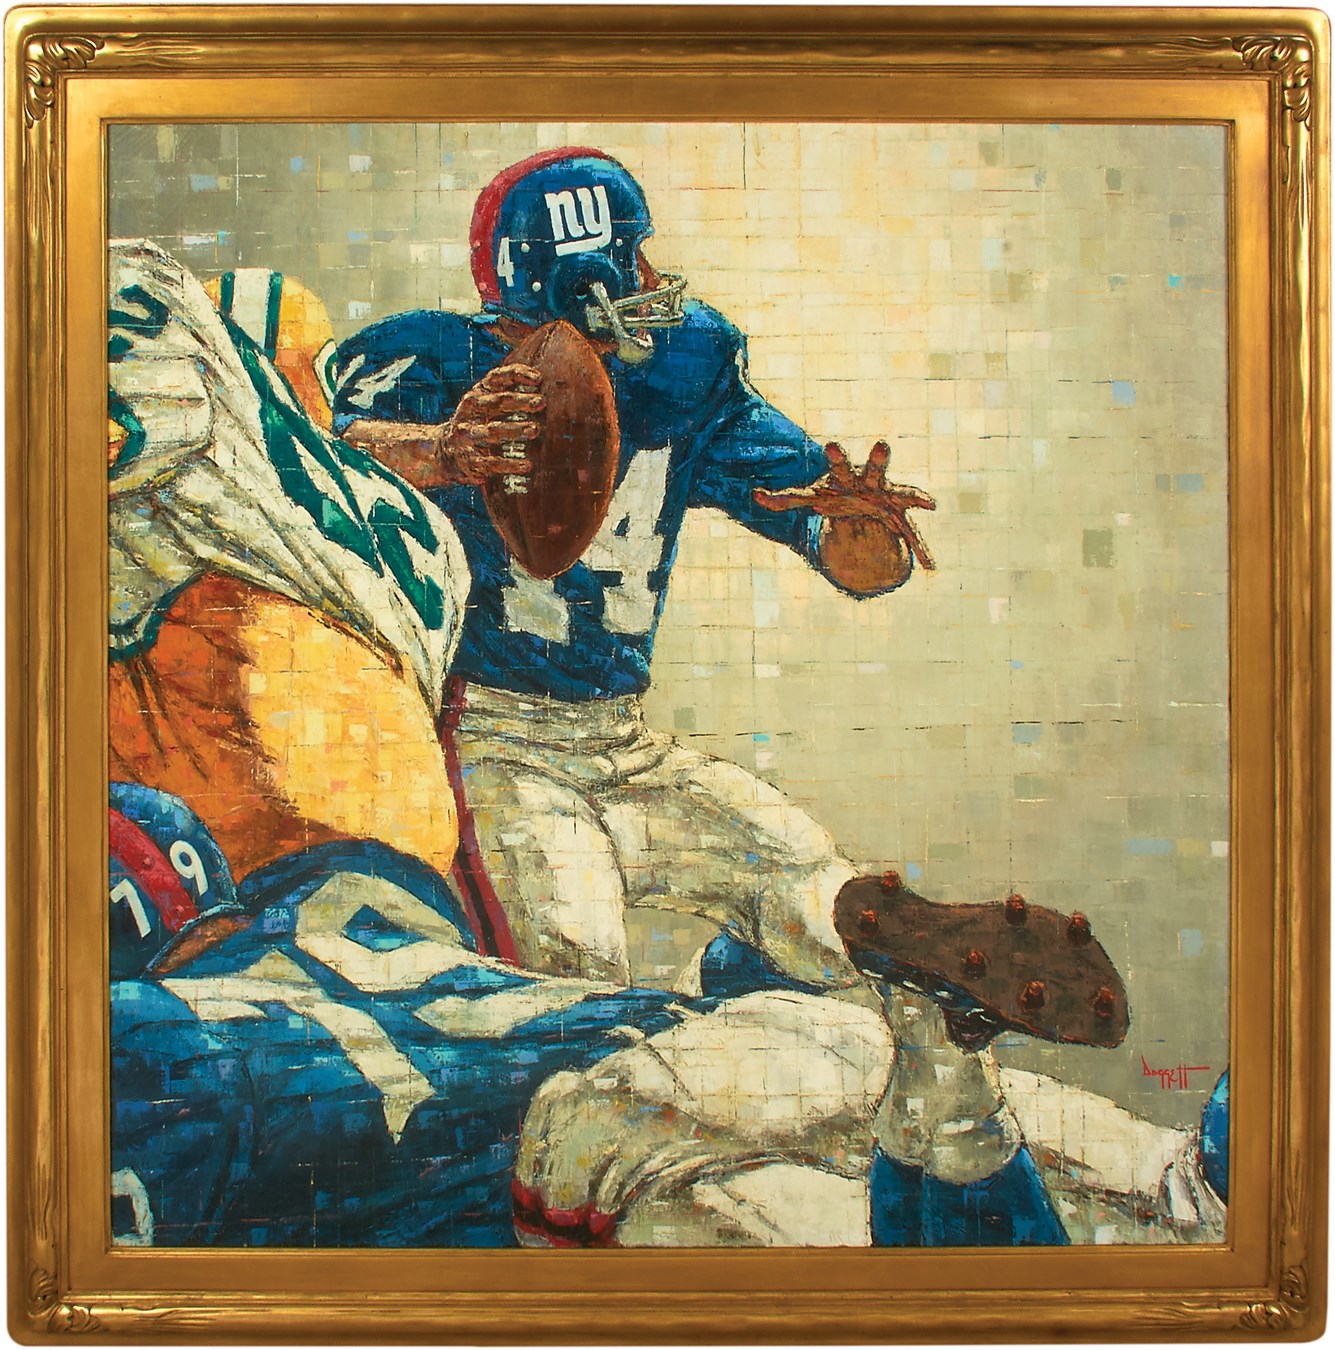 Football - 1968 Y.A Title "Time Running Out" Oil on Canvas by Noel Daggett (1925-2005)